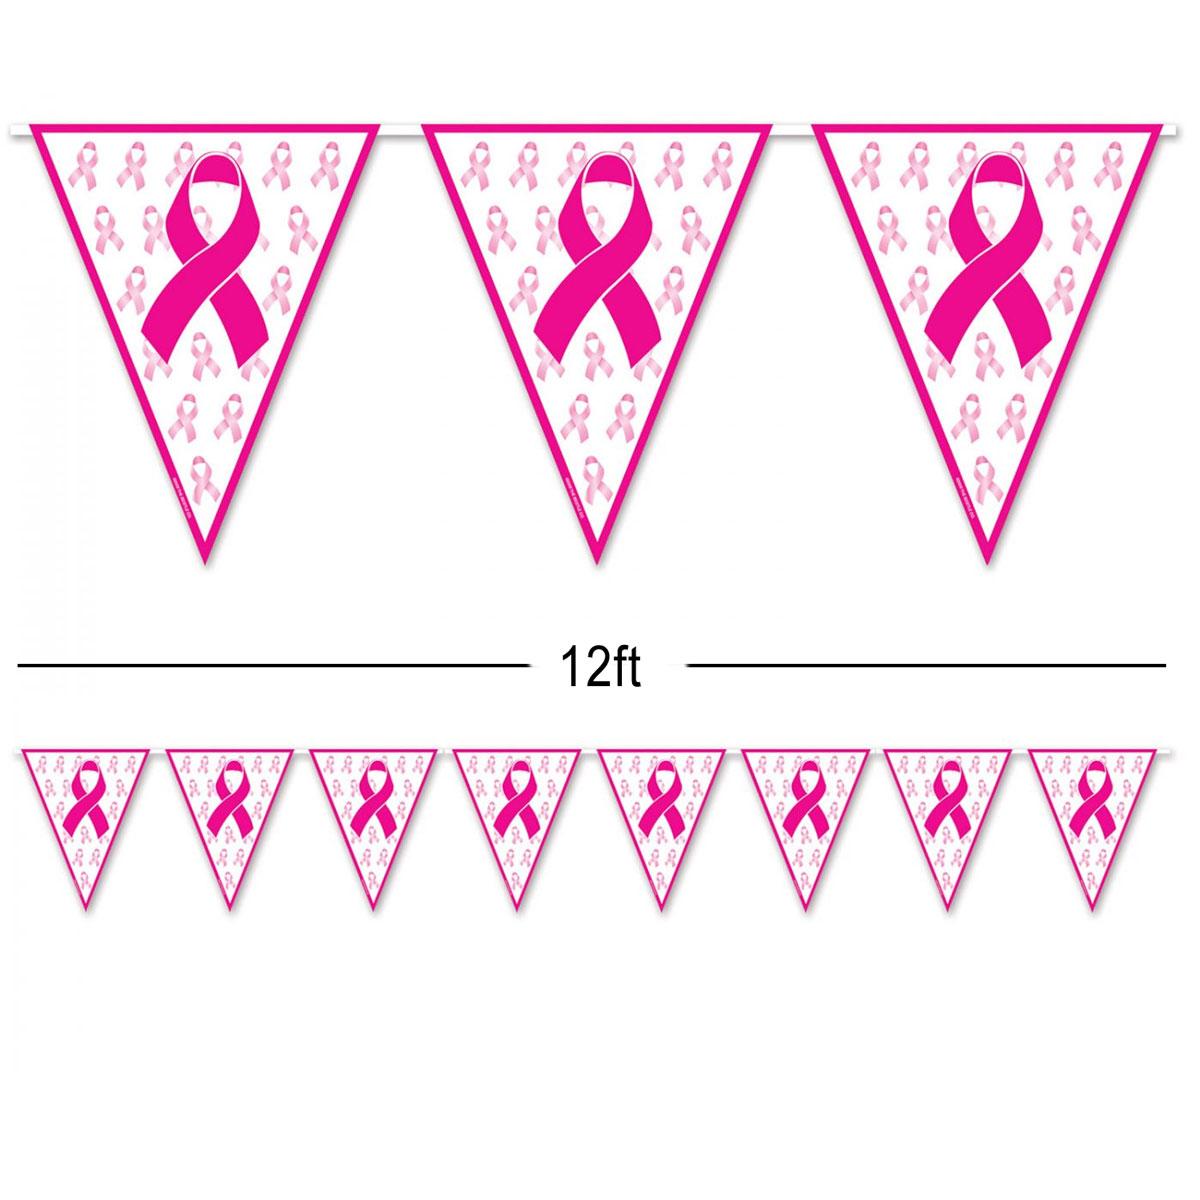 Pink Ribbon Pennant Banner by Beistle 54101 - 12ft length all weather pink bow bunting available here at Karnival Costumes online party shop